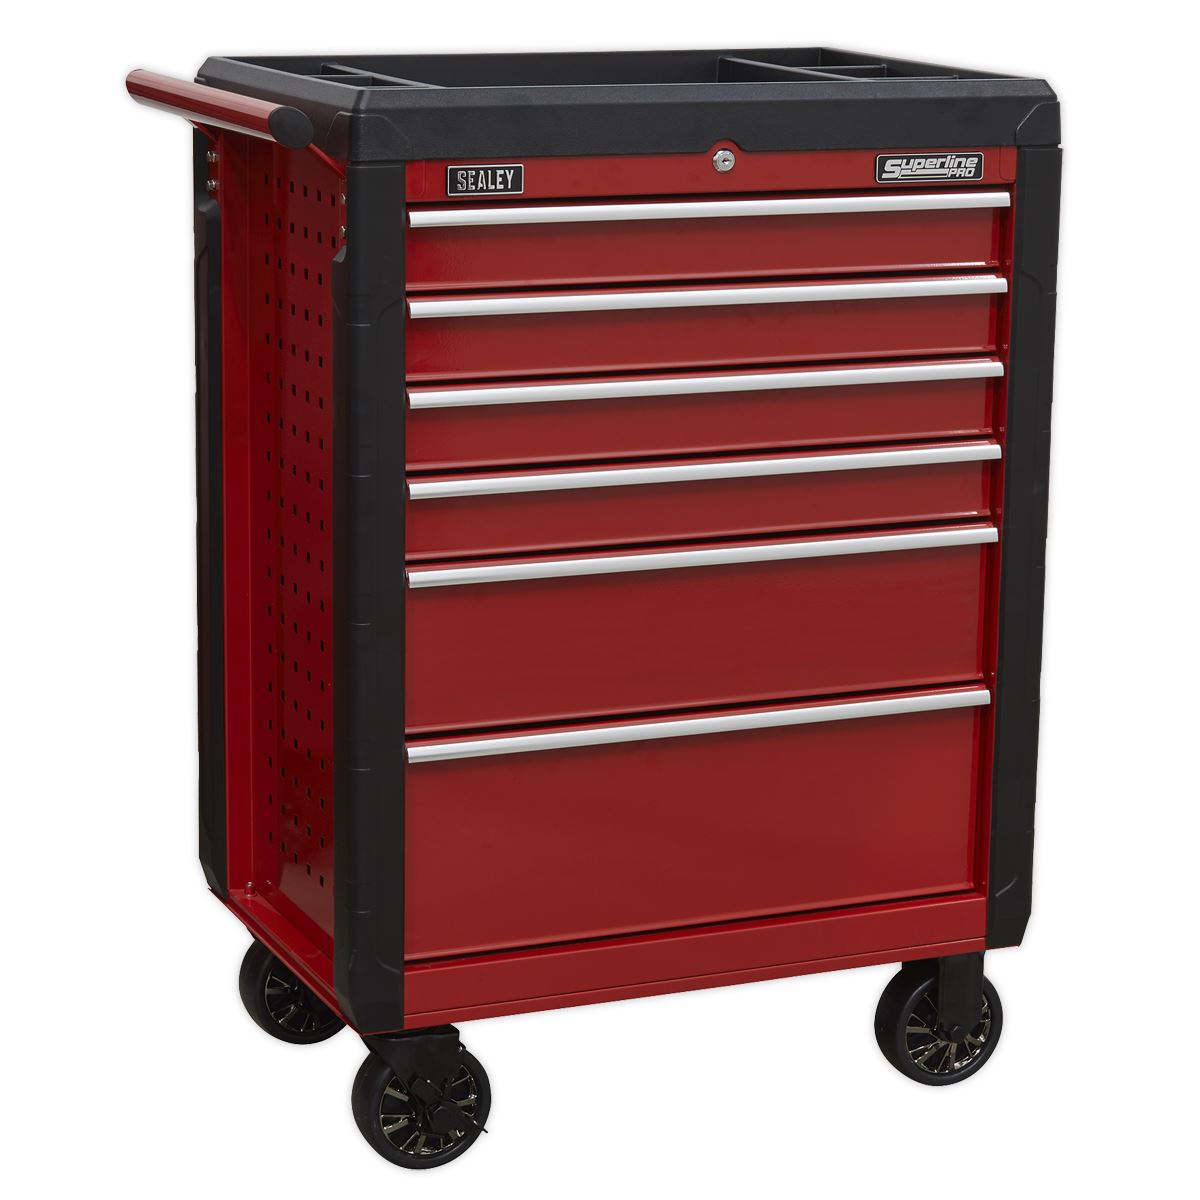 Sealey Superline Pro Rollcab 6 Drawer with Ball-Bearing Slides